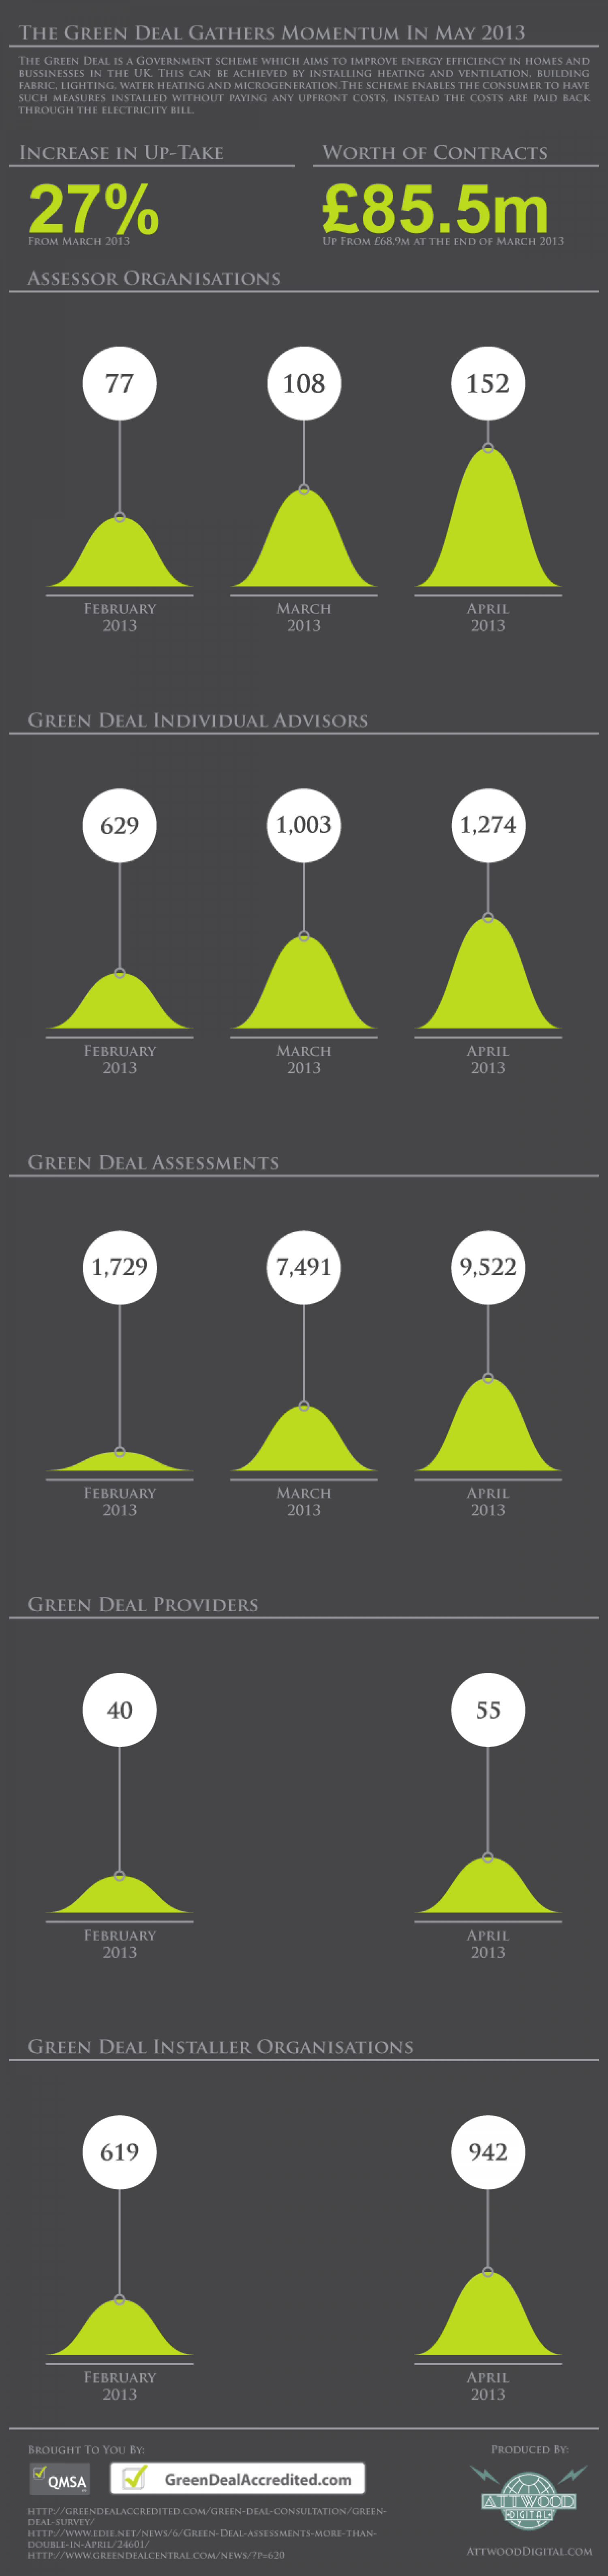 The Green Deal Gathers Momentum In May 2013 Infographic